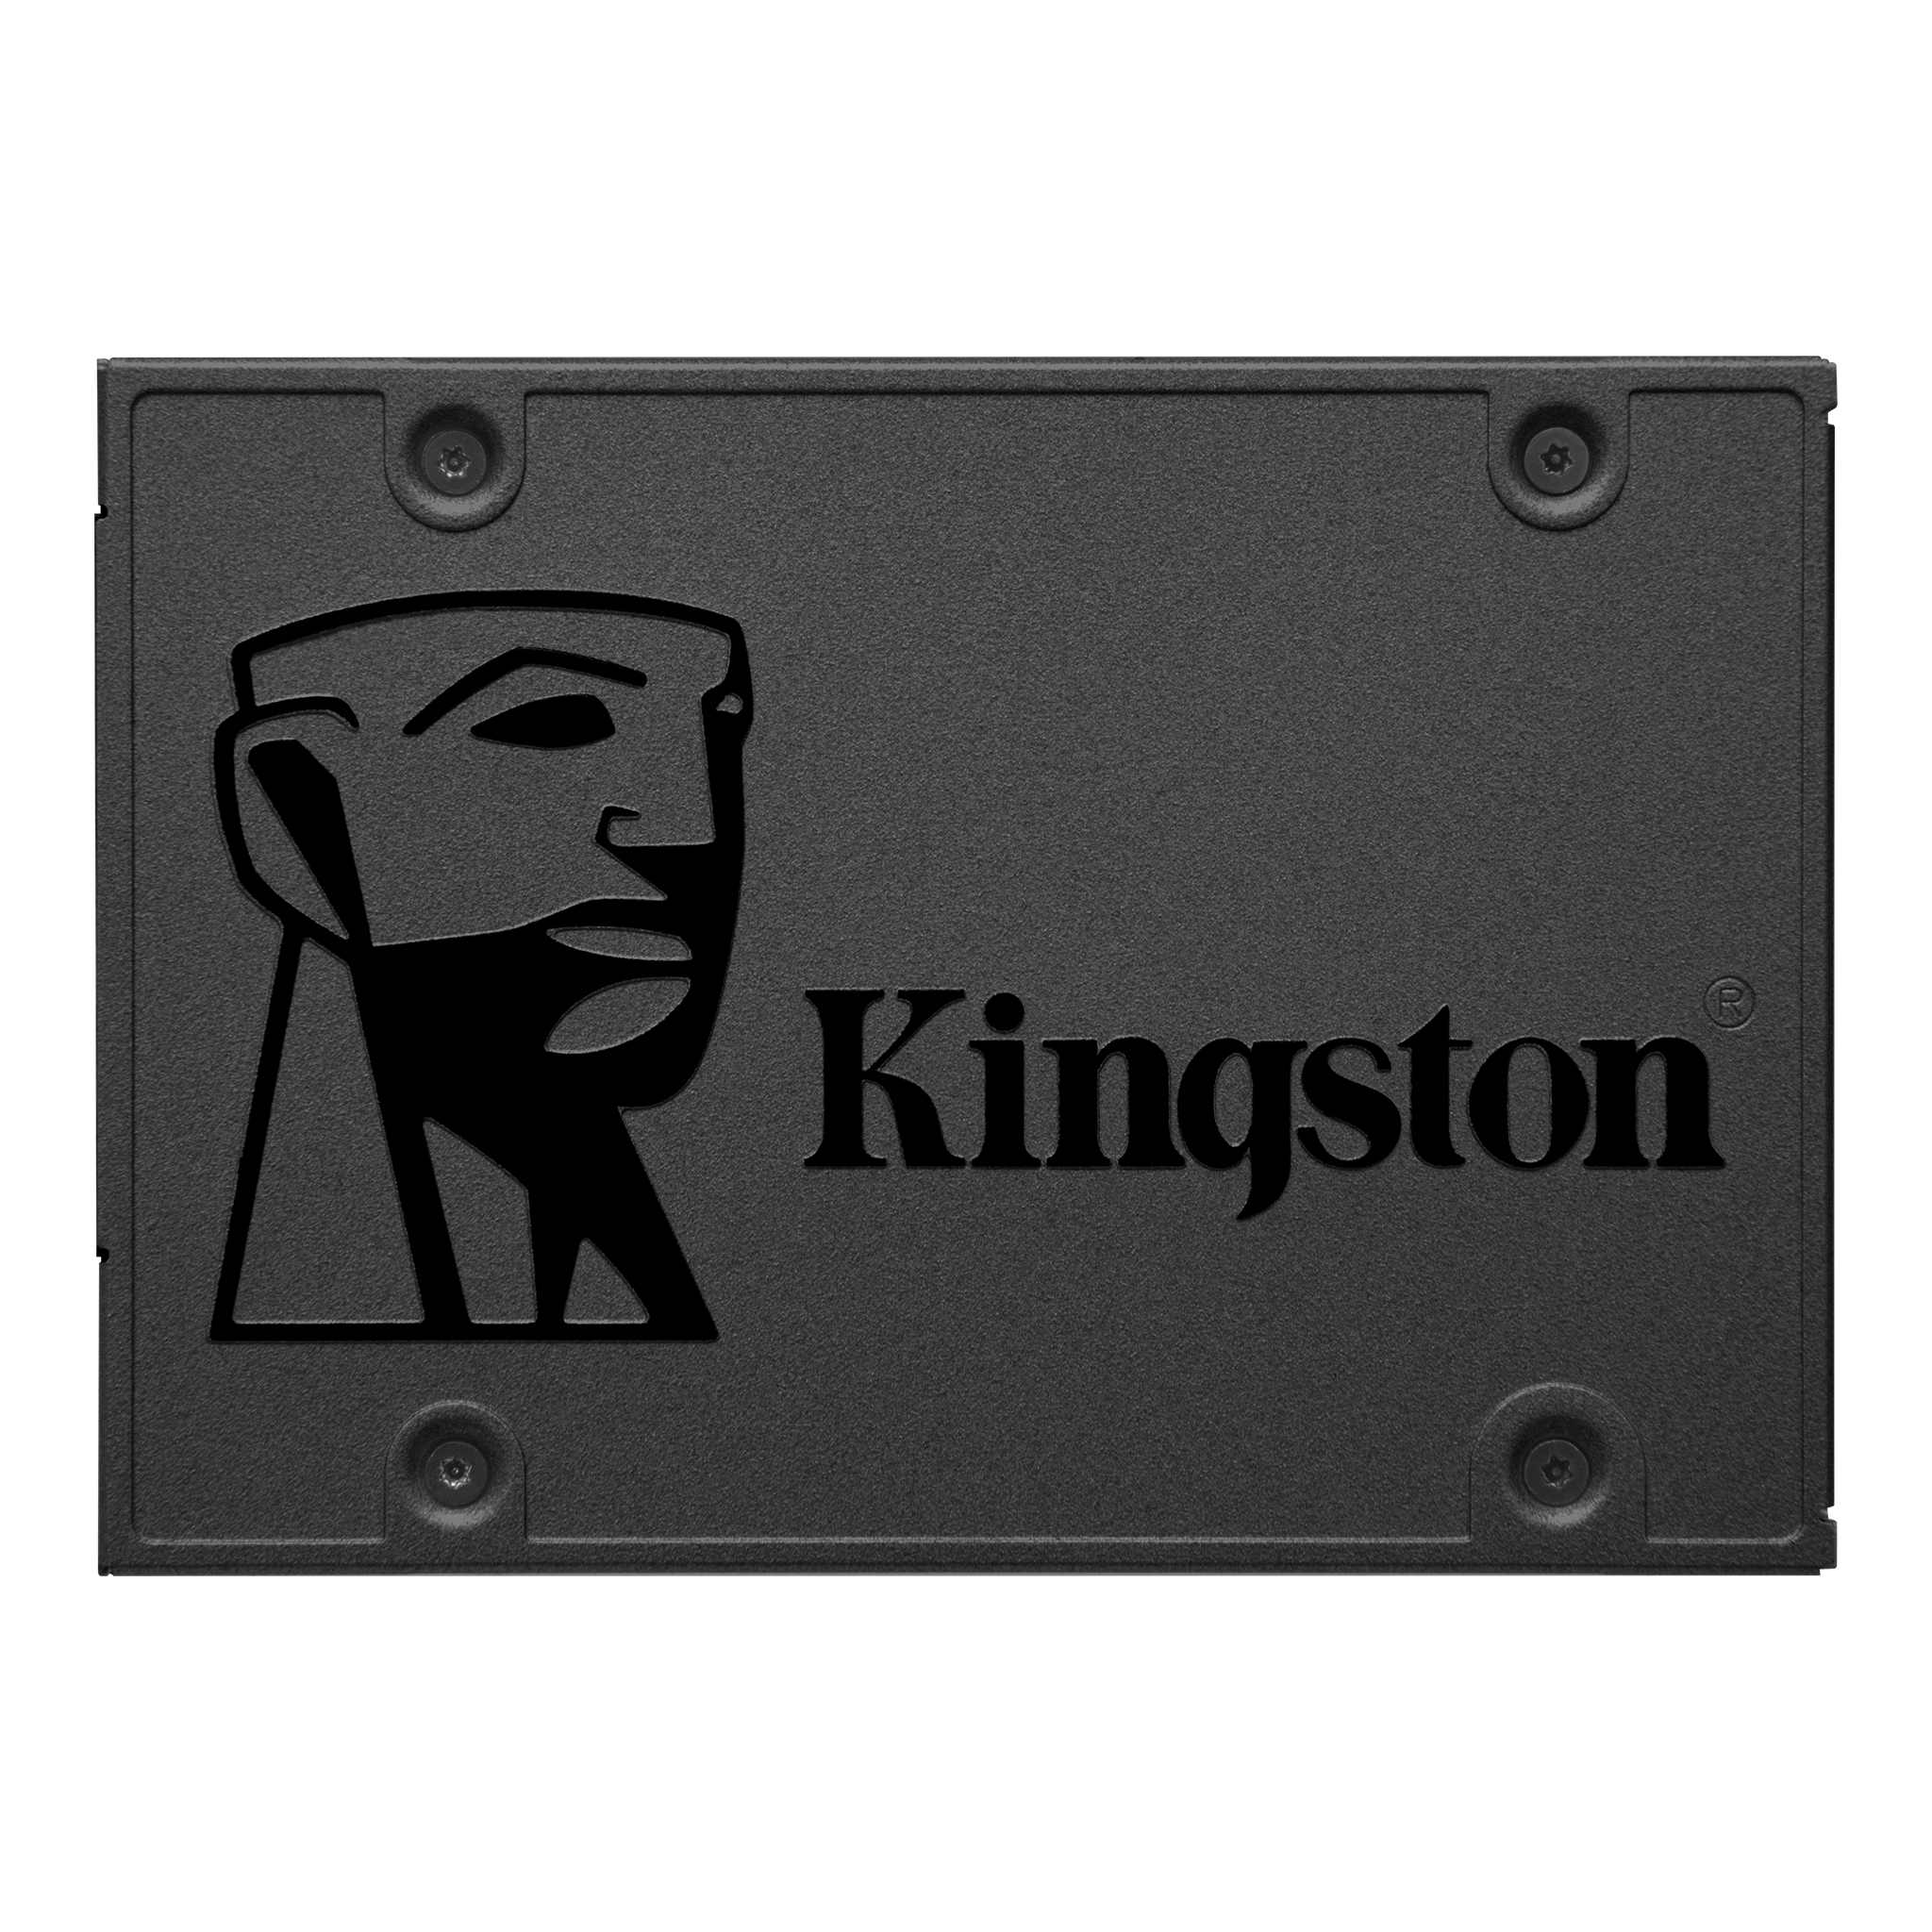 A400 Solid State Drive – 240GB～960GB - Kingston Technology